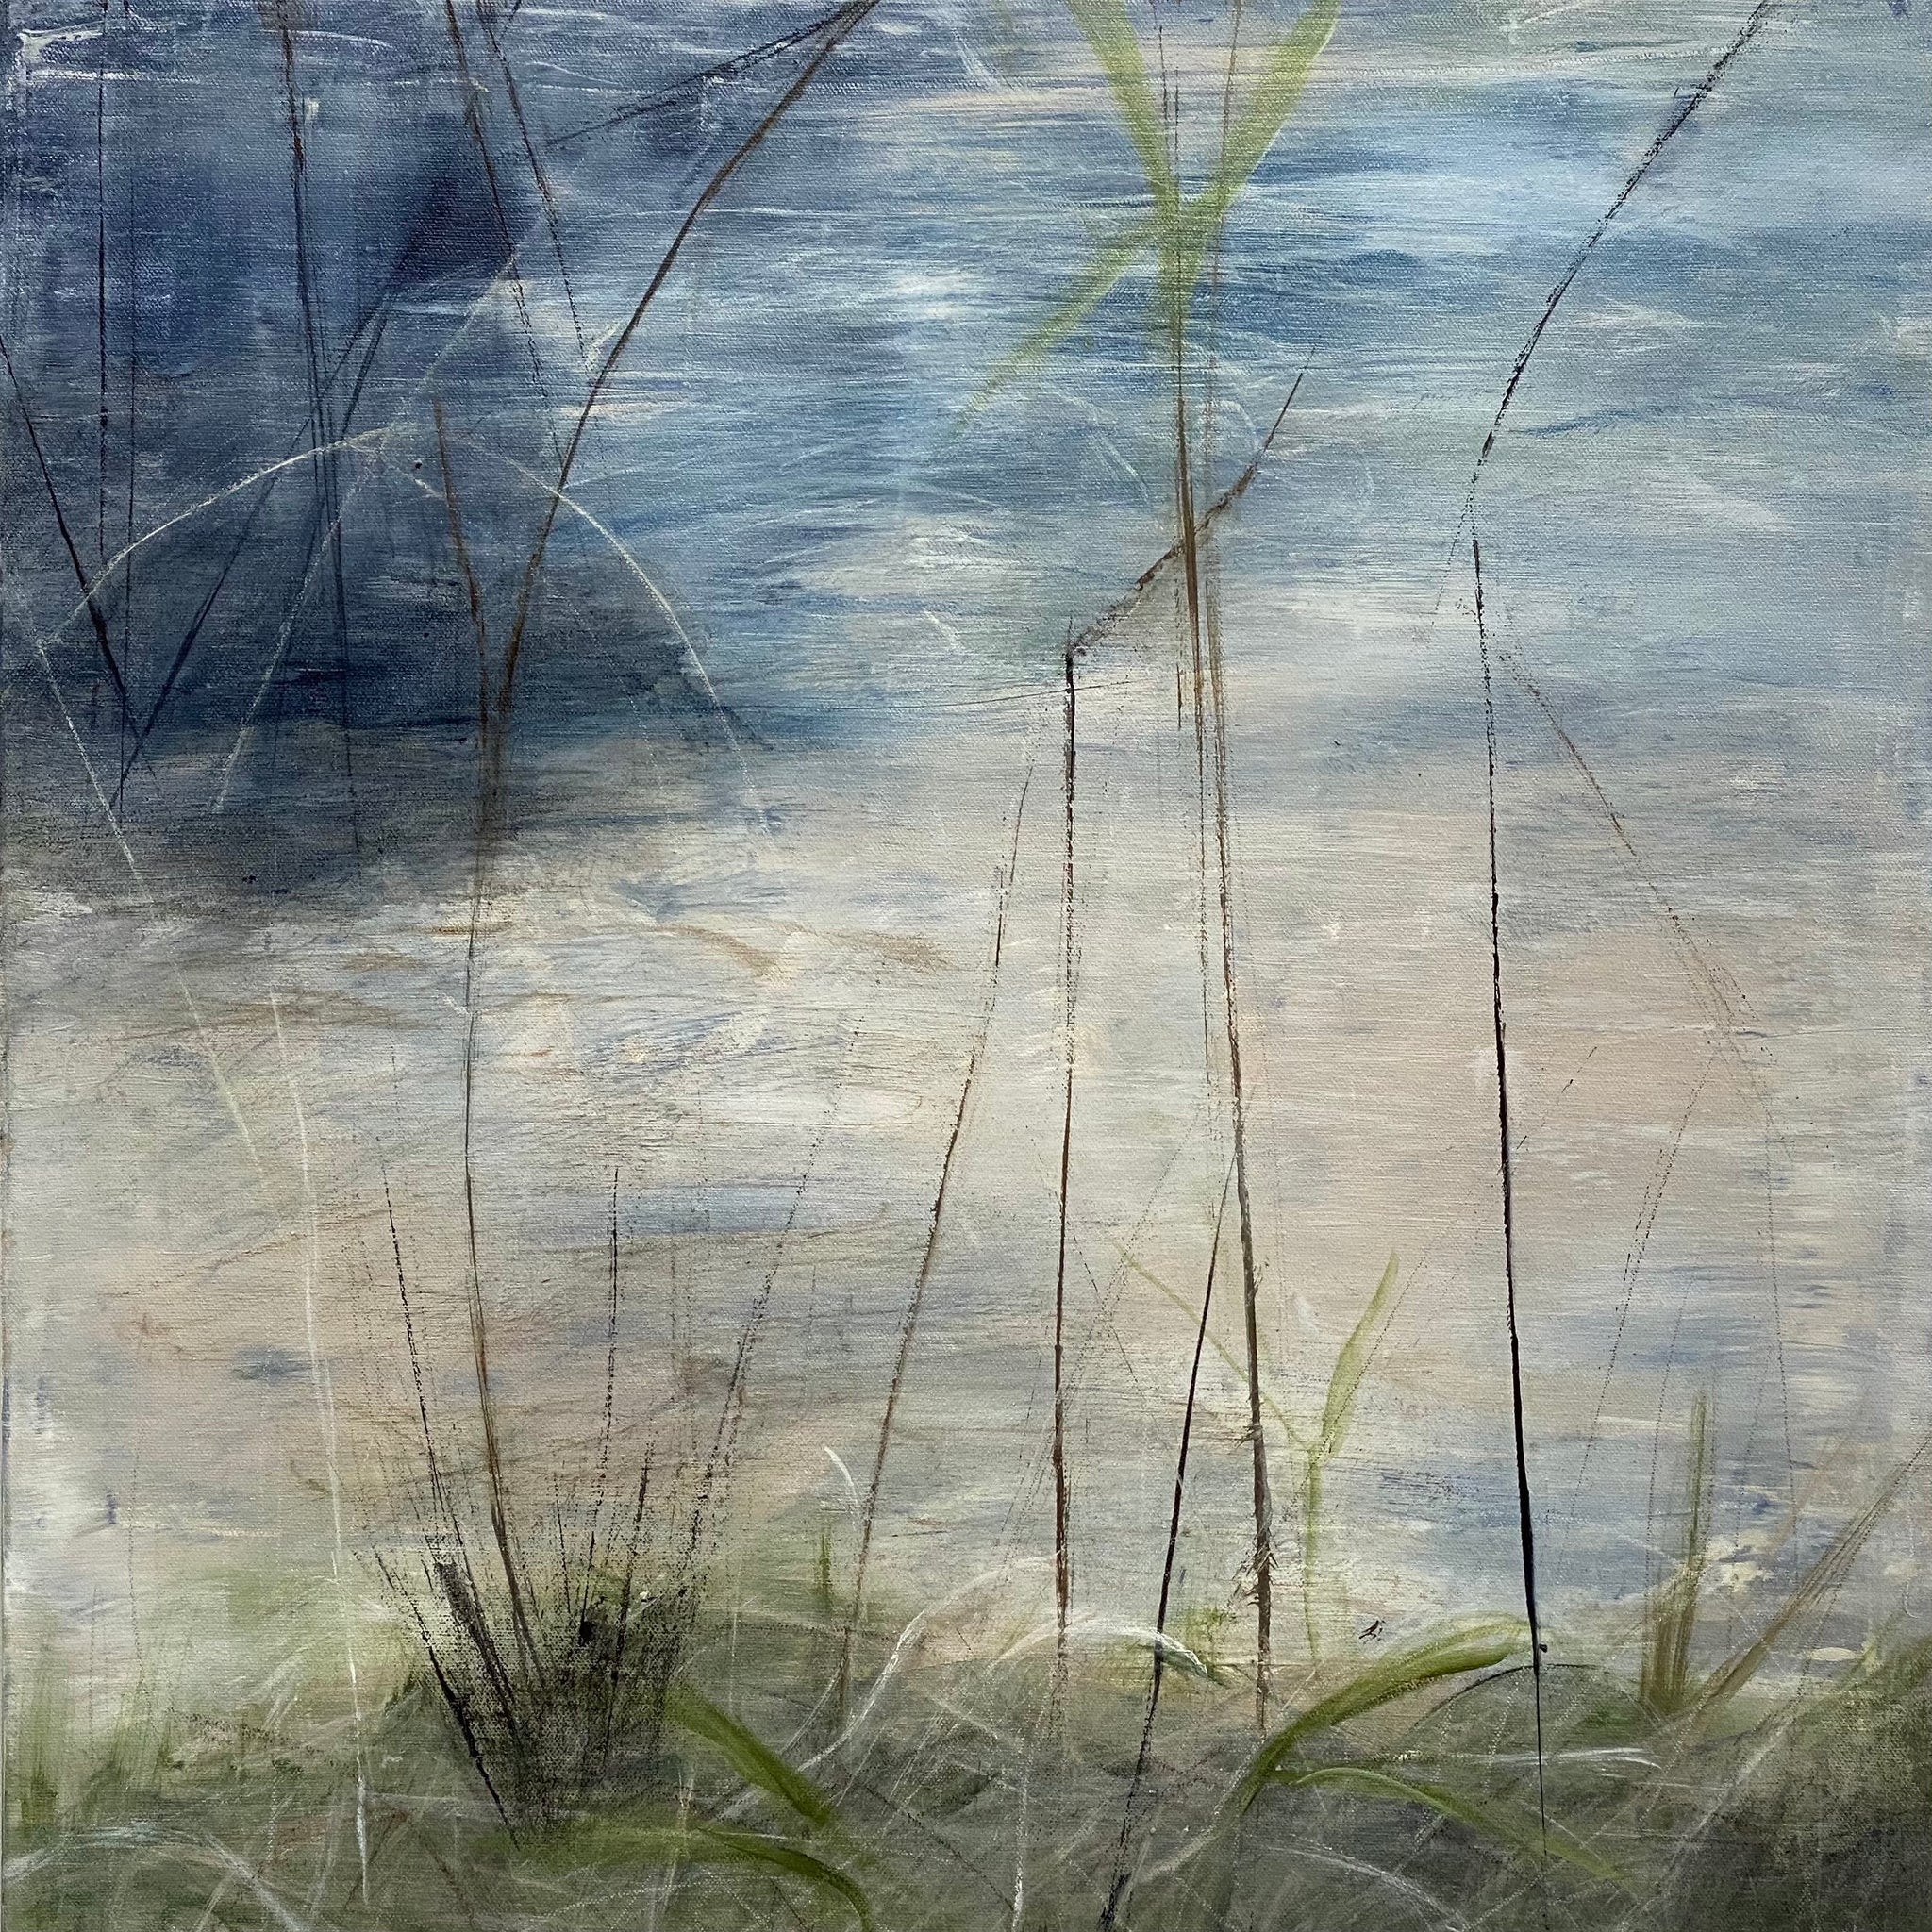 Juanita Bellavance, Caught up in grasses. From the Chestatee River portfolio, 2021, Acrylic on canvas, 24 x 24 inches.